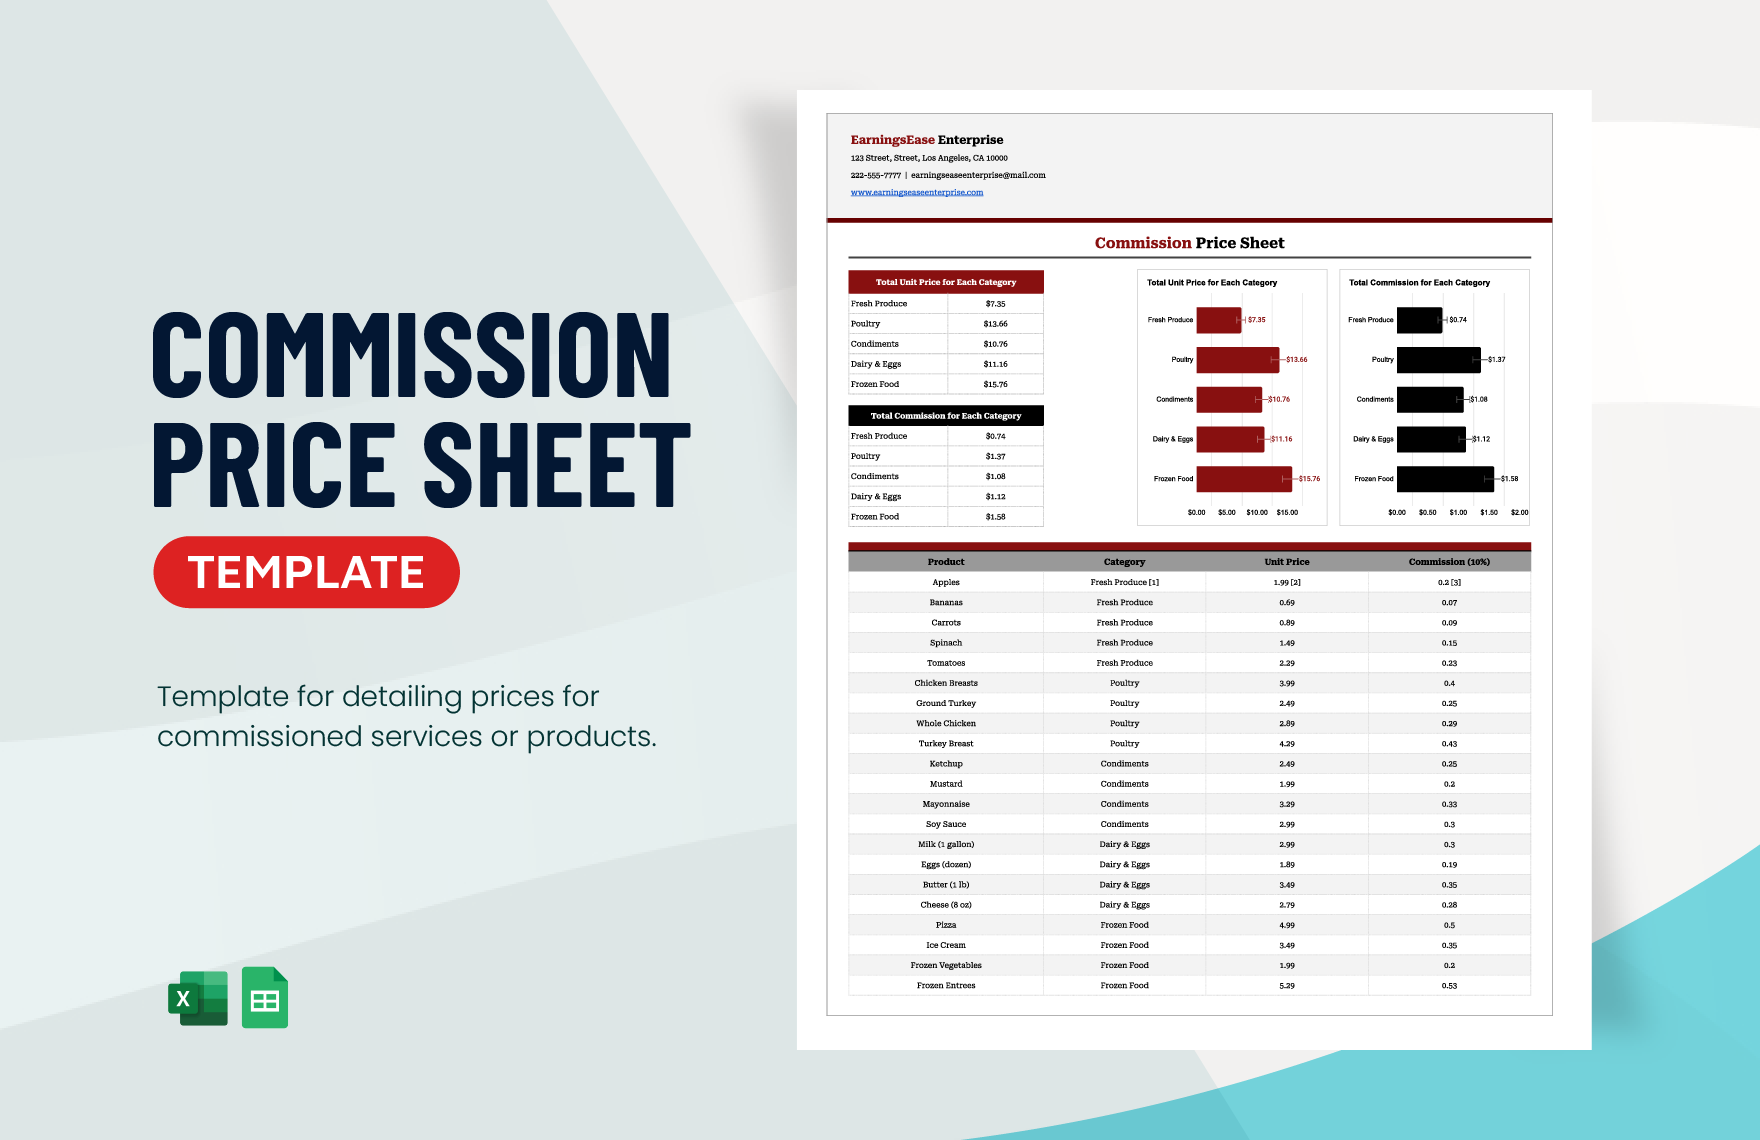 Commission Price Sheet Template in Excel, Google Sheets